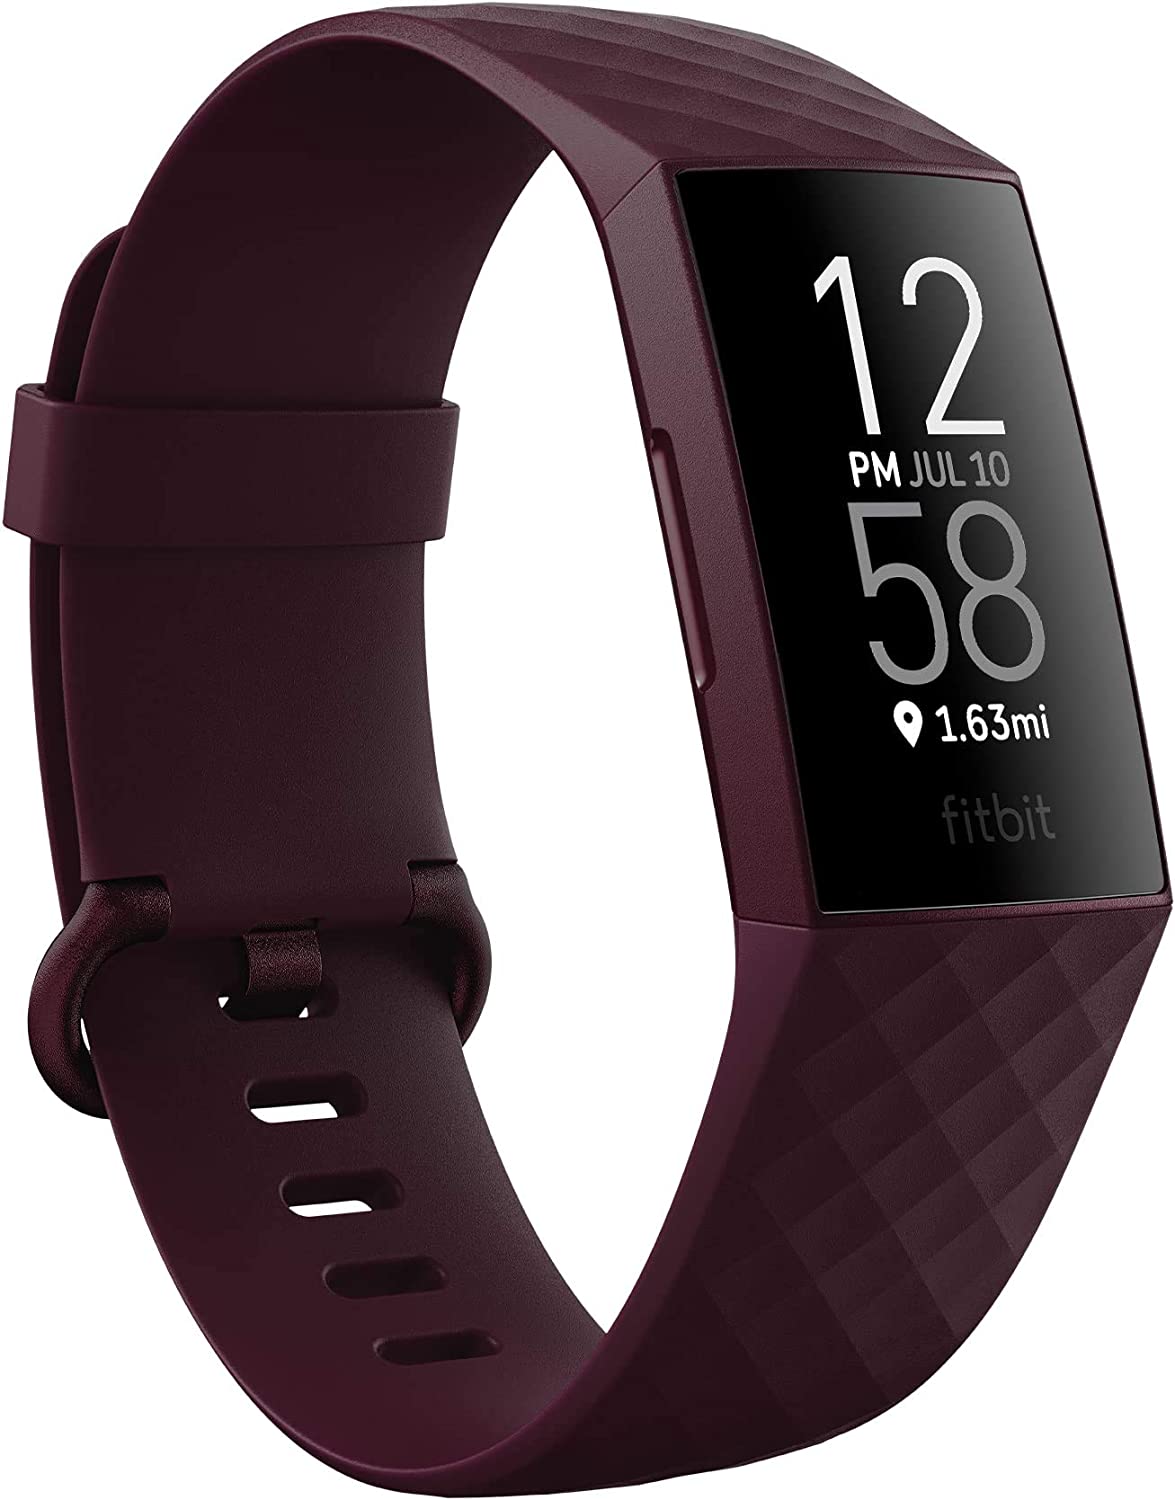 Get Fitbit Charge 4 Advanced Fitness Tracker now $158.76with free delivery